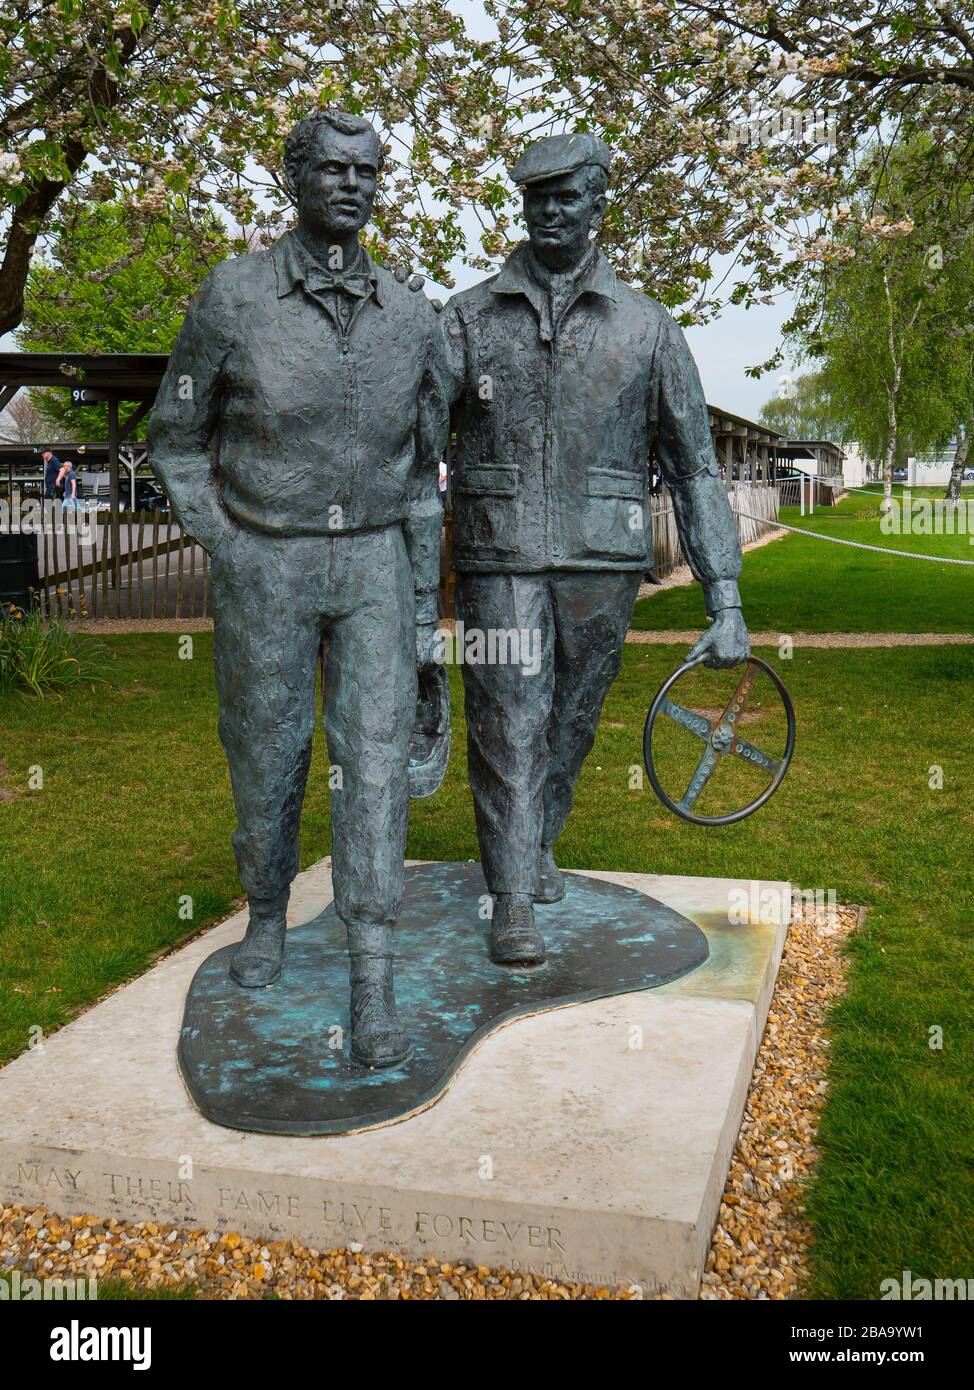 Mike Hawthorn and Lofty England statue at Goodwood motor racing circuit, West Sussex UK 2019 Stock Photo